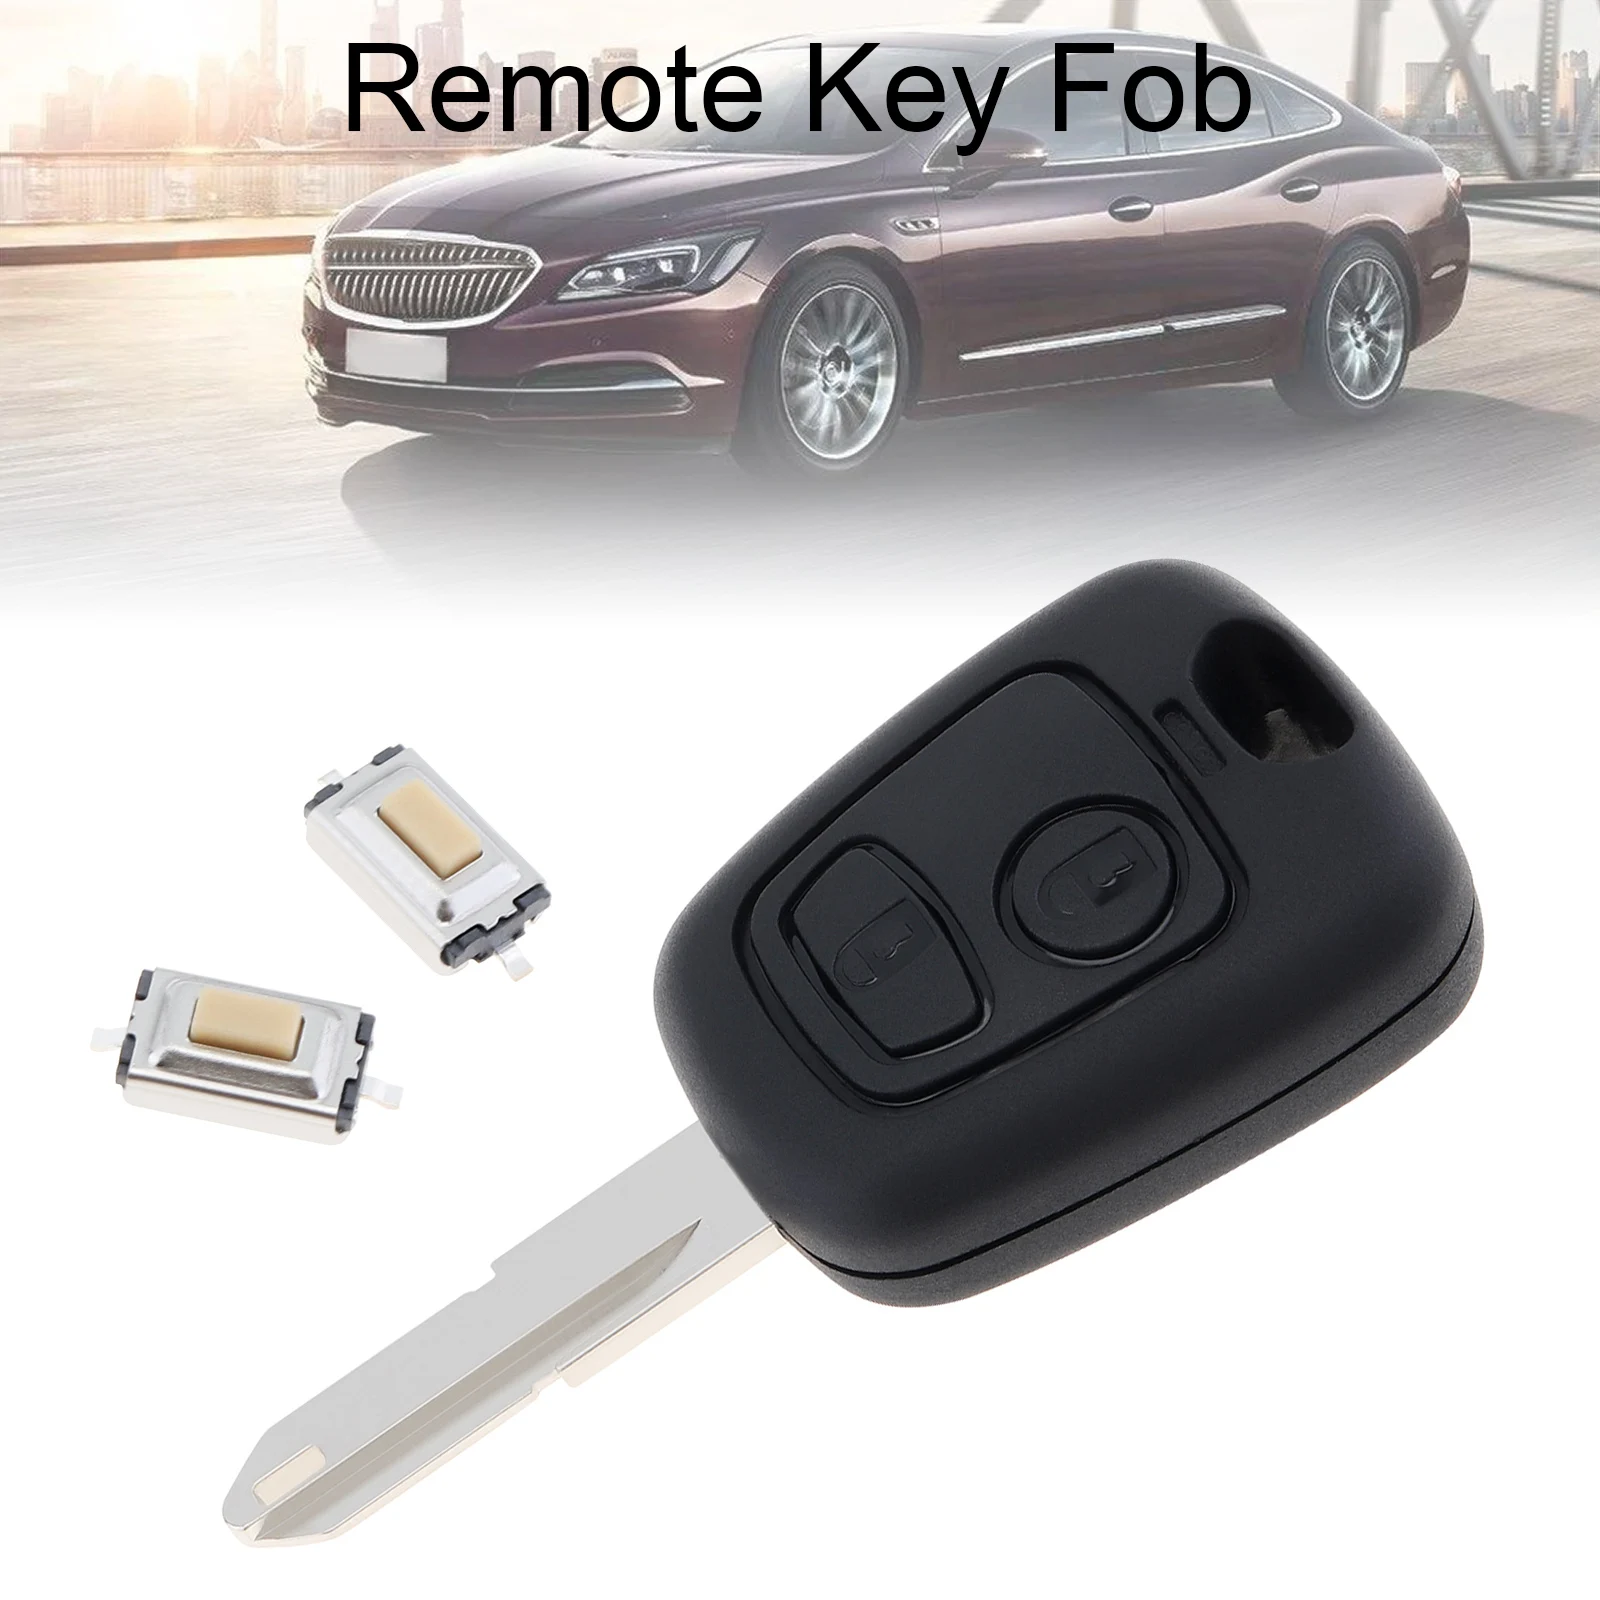 2 Buttons Car Remote Key Shell with 307/206 Blade for Citroen C1 / C2 / C3 / C4 / XSARA Picasso / Peug eot 307 / 107 / 207 / 407